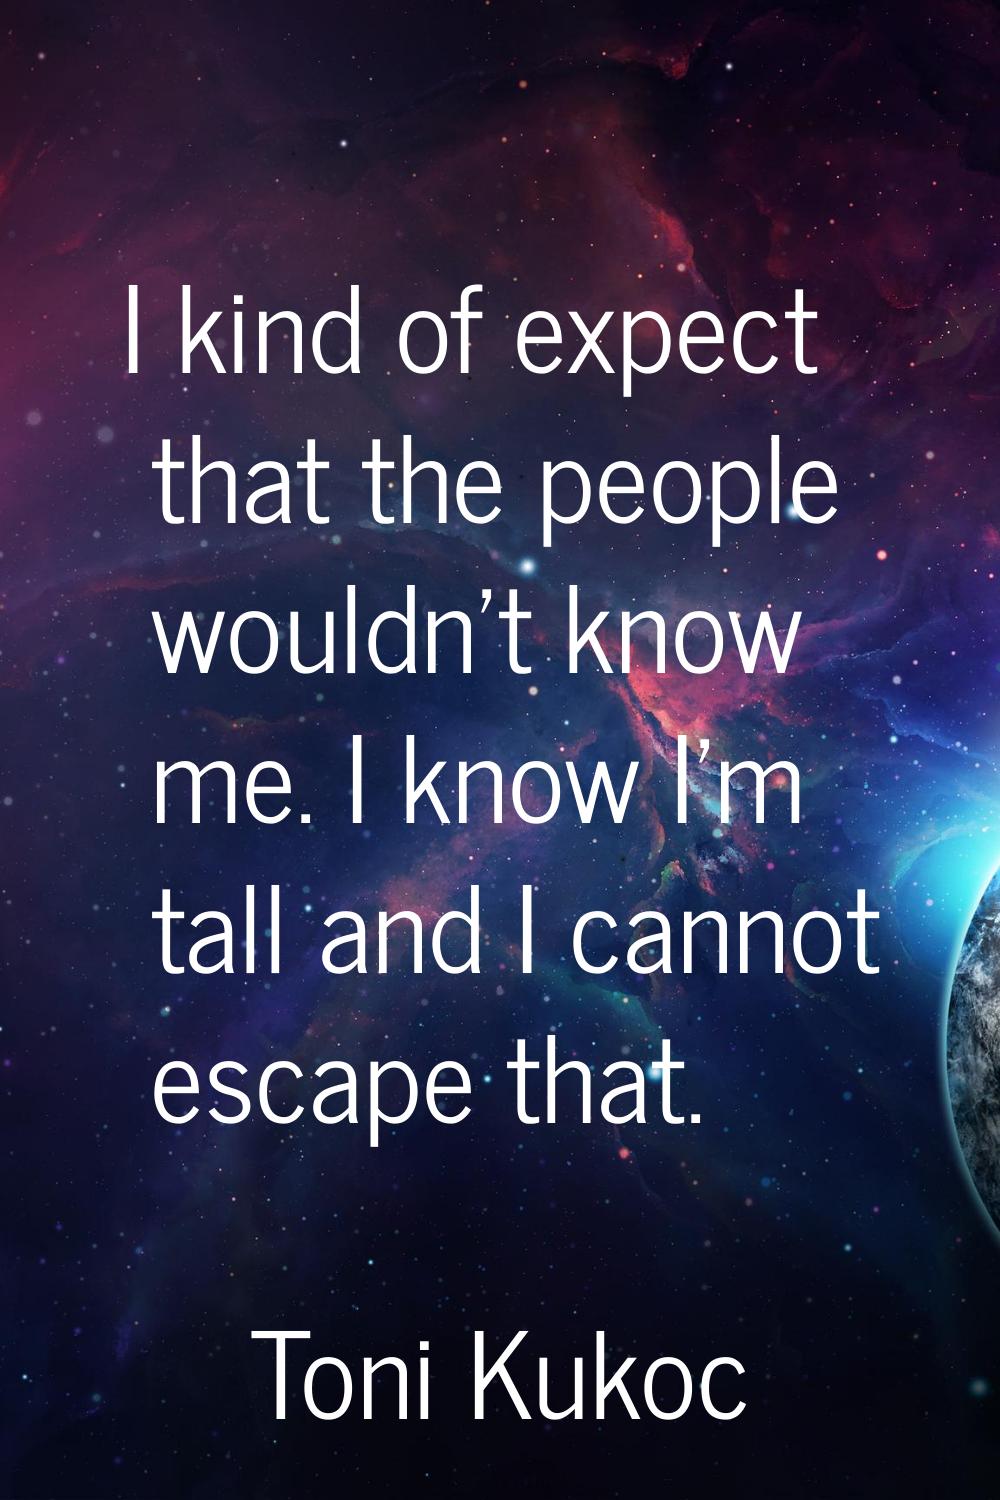 I kind of expect that the people wouldn't know me. I know I'm tall and I cannot escape that.